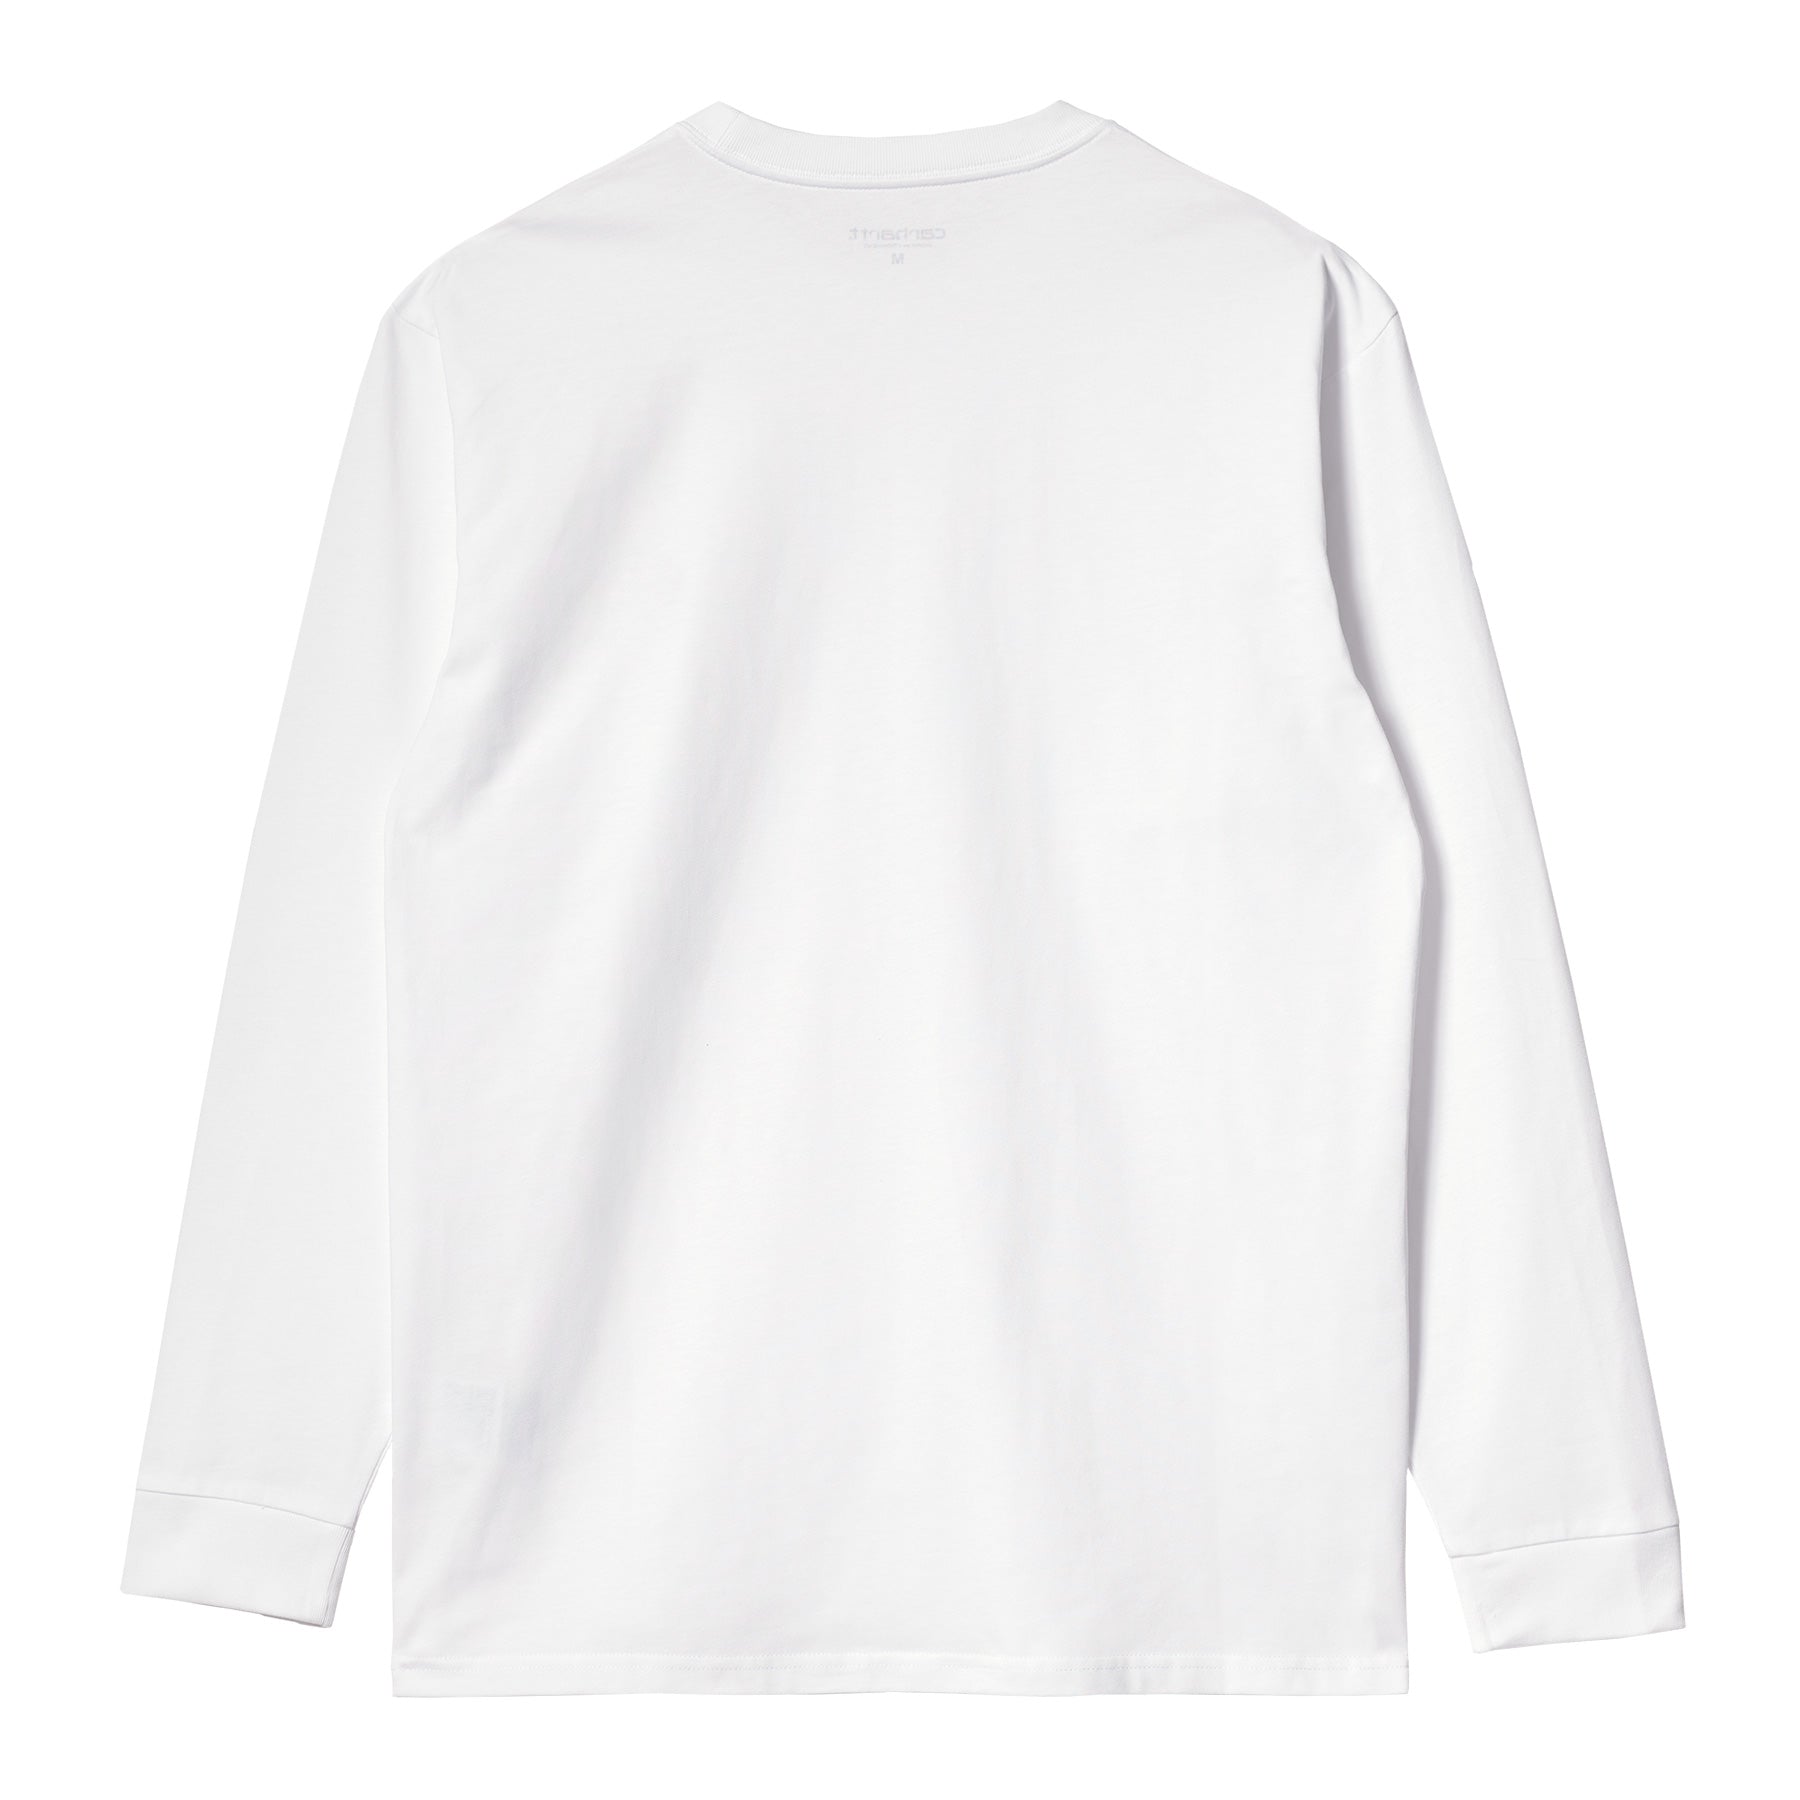 Carhartt WIP Chase Long Sleeve T-shirt - White/Gold